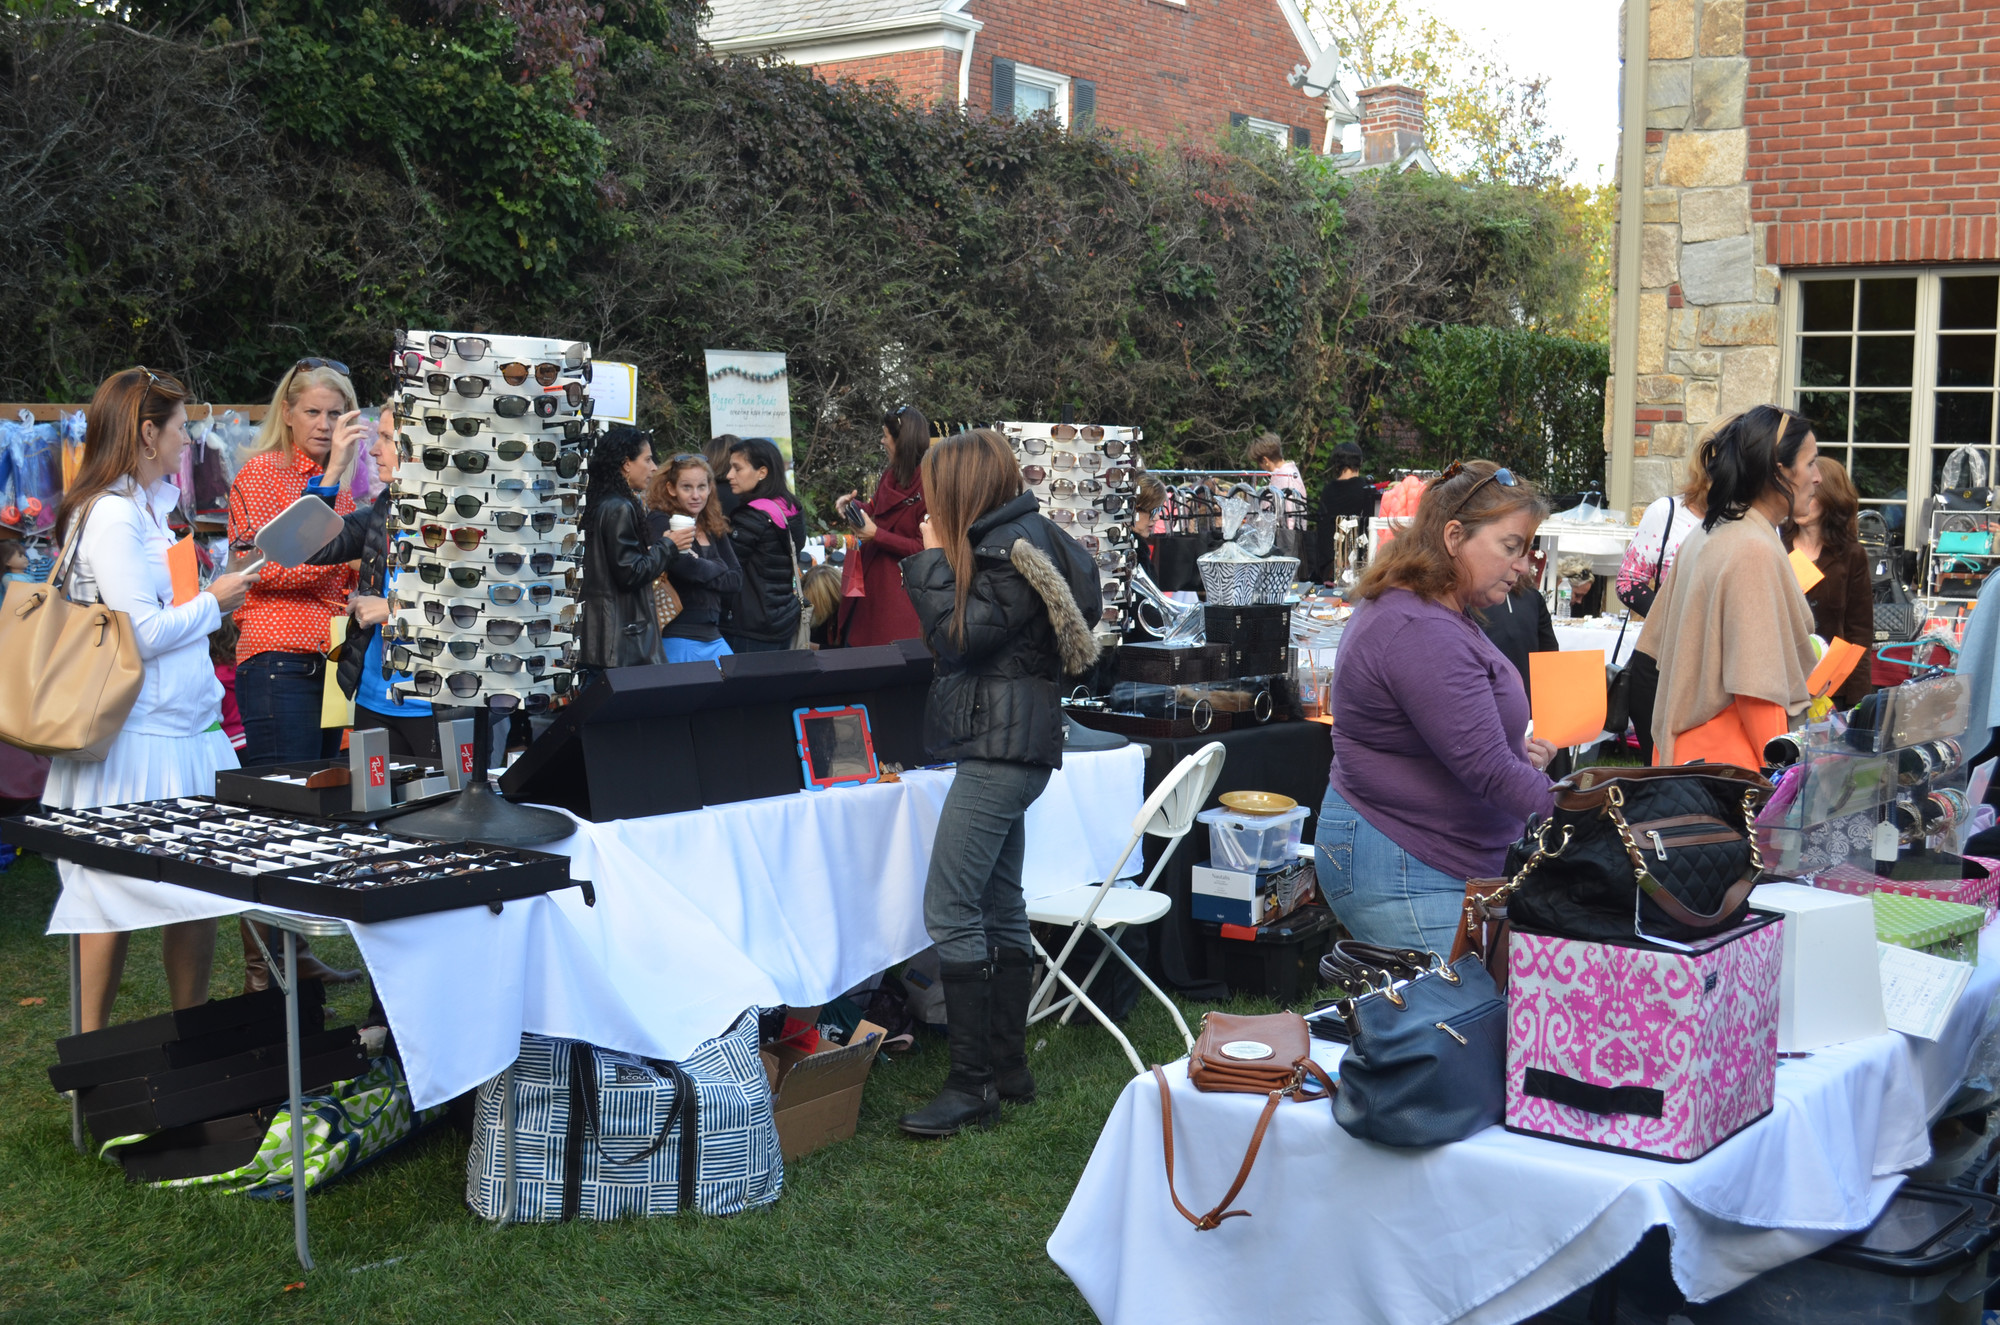 Vendors from all over came to Carol Ruchalski’s yard to sell their goods. (Tim Baker/Herald)